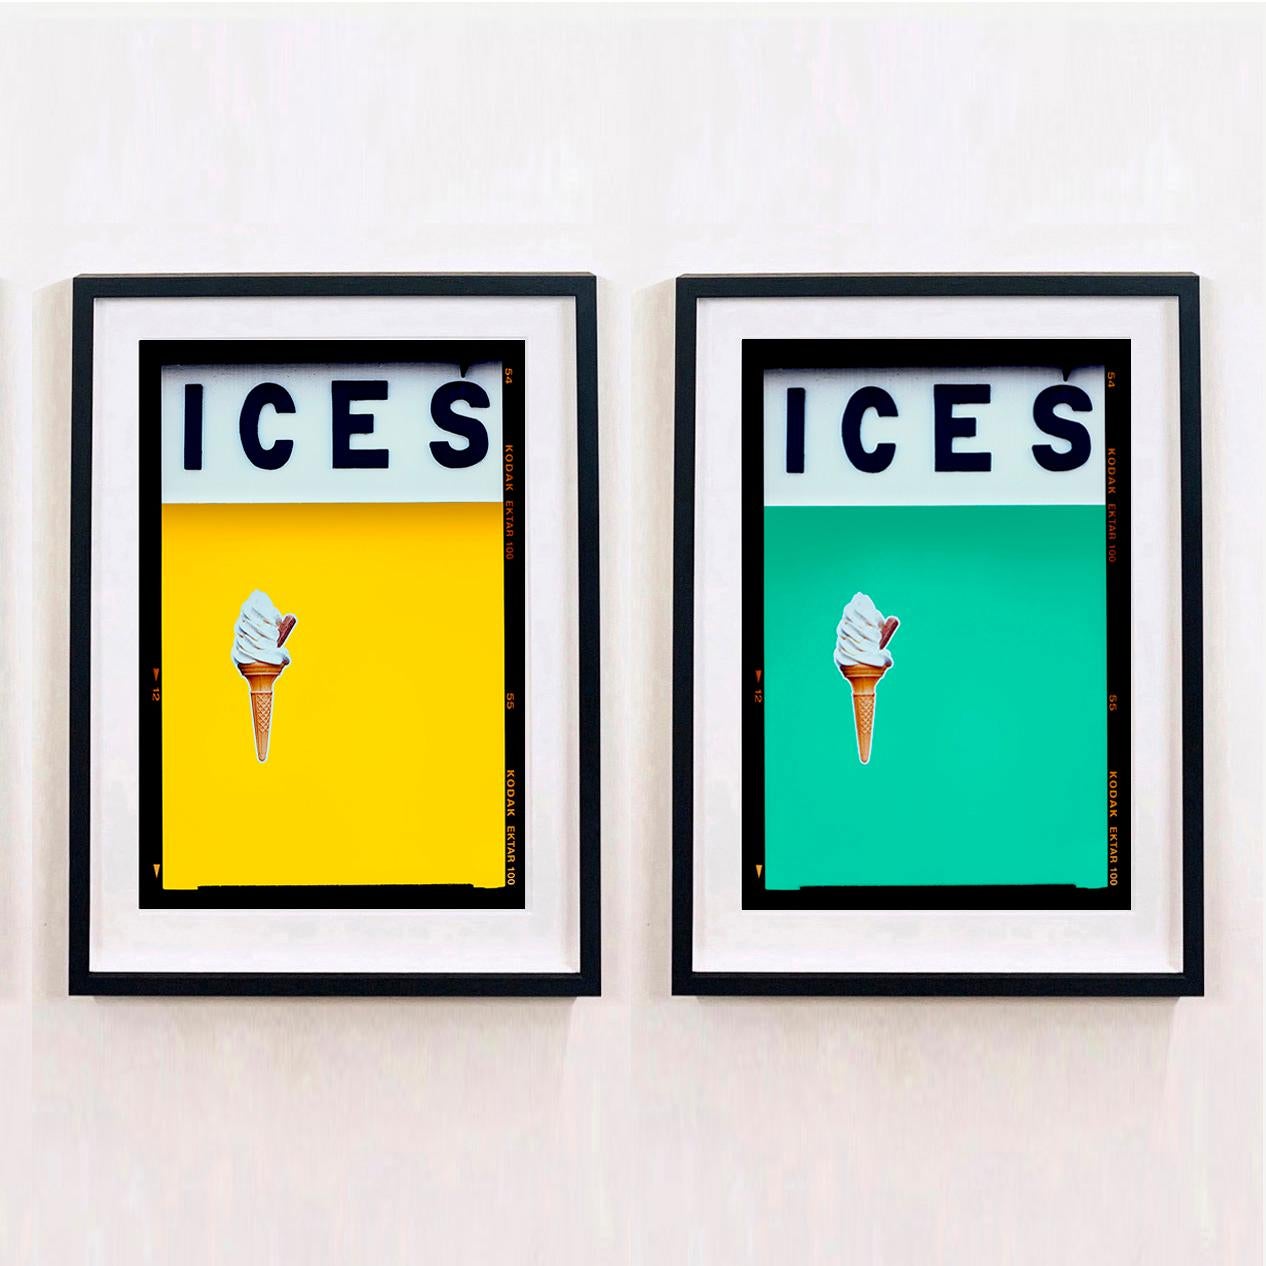 ICES Pair - Two Framed Artworks - Pop Art Color Photography - Print by Richard Heeps